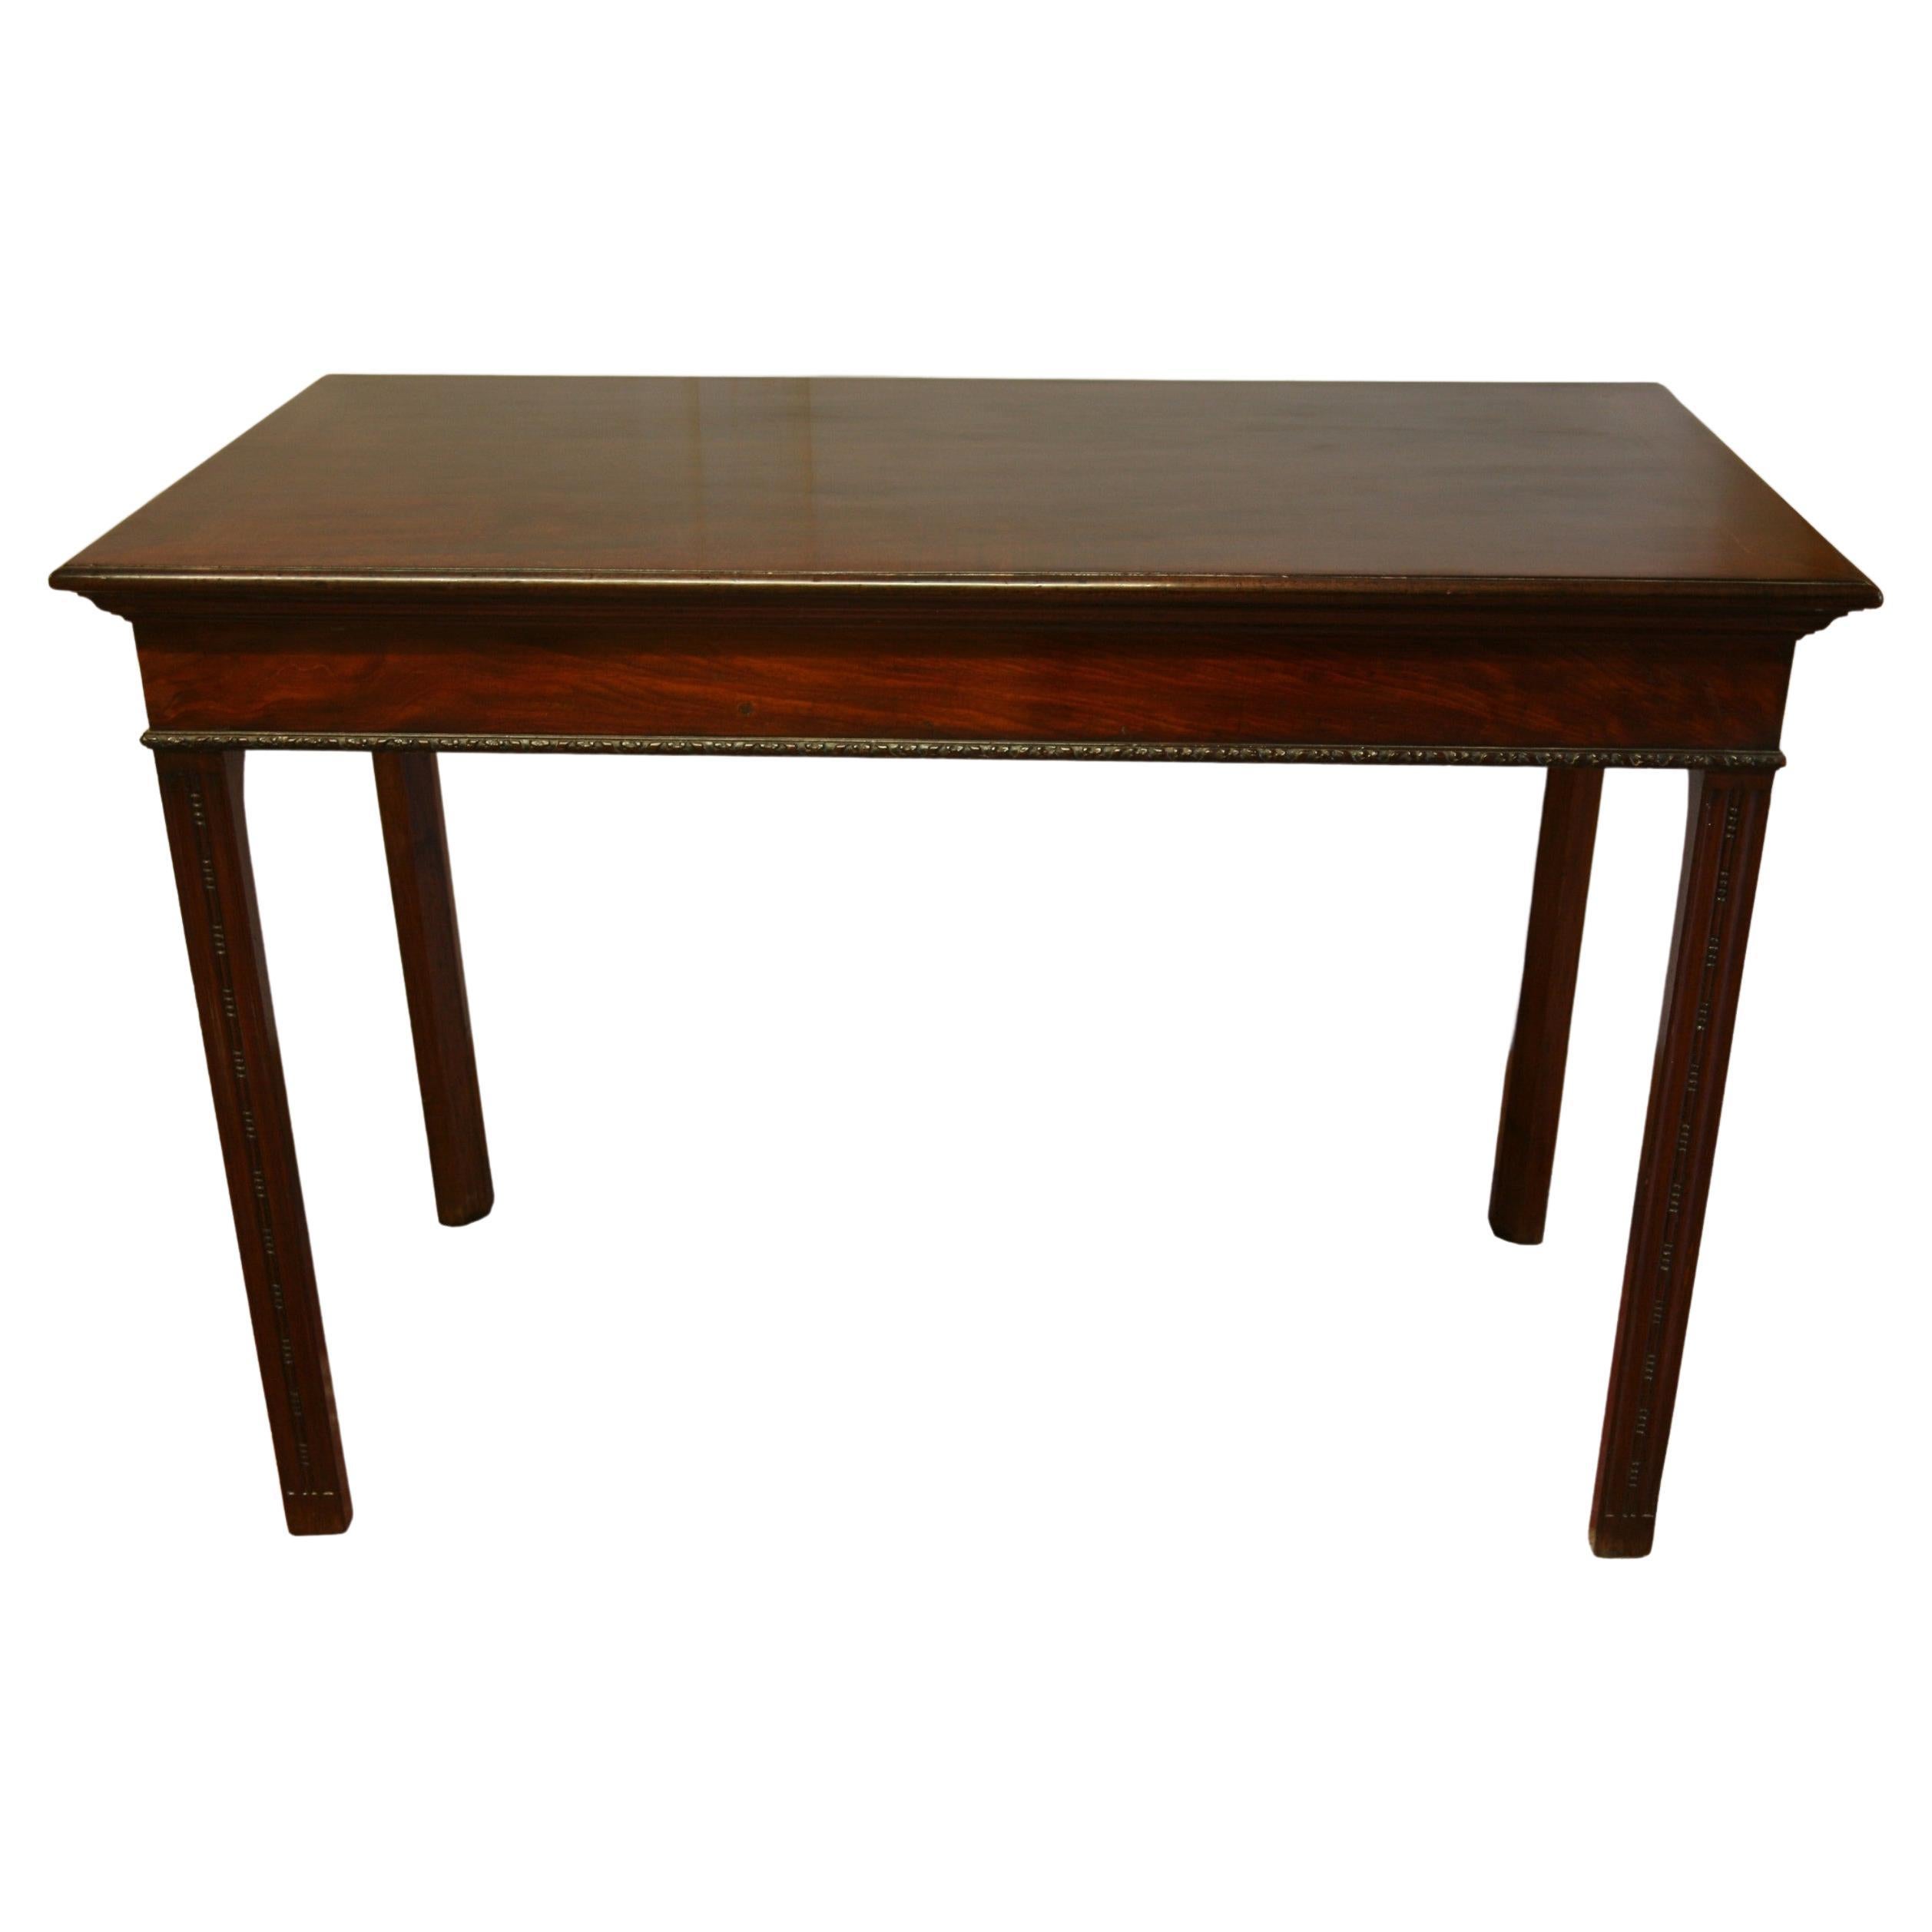 Fine Georgian Mahogany Cyhippendale Side or Serving Tanle with Superb Legs